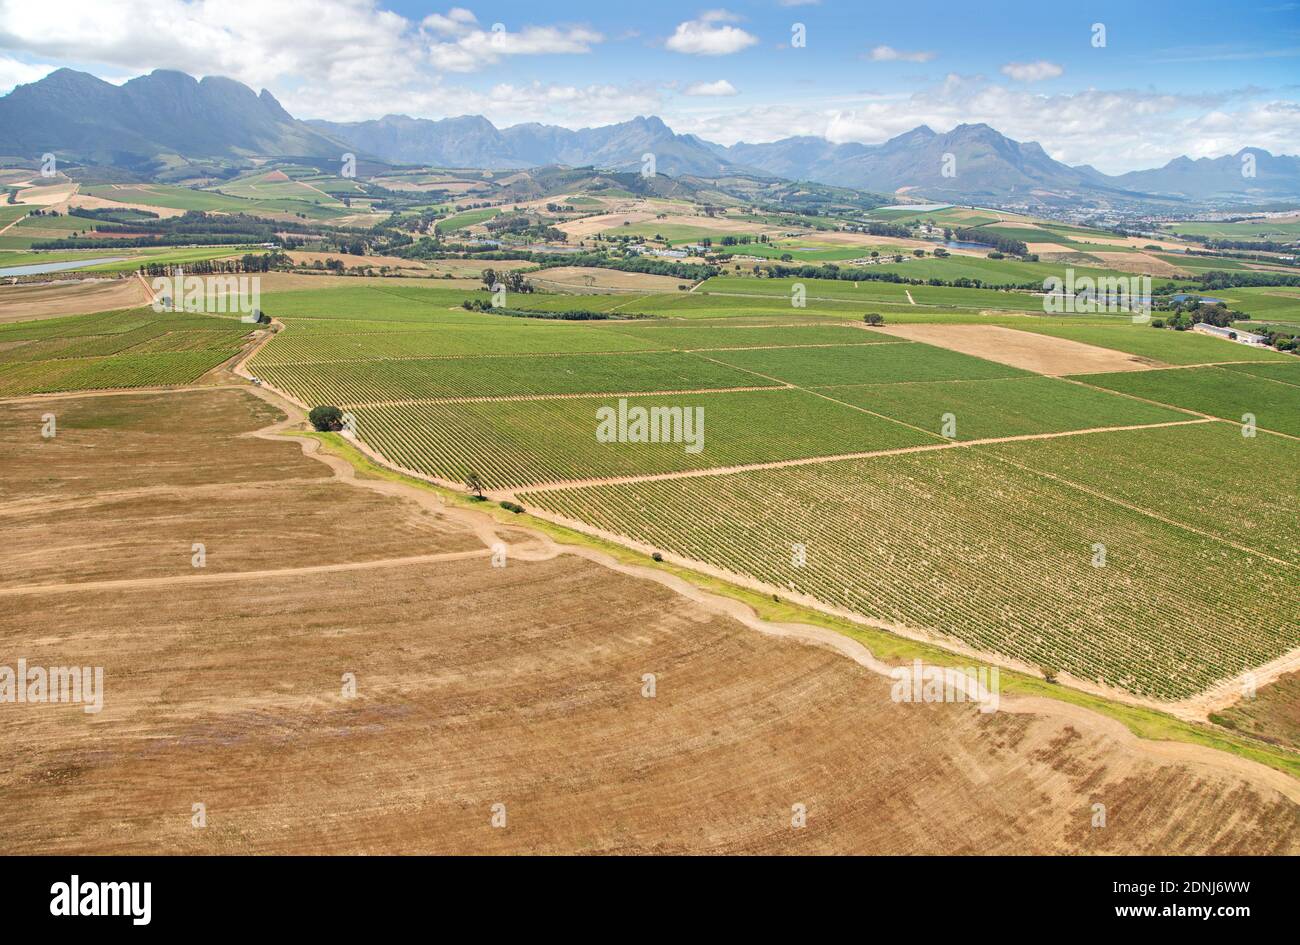 Cape Town, Western Cape / South Africa - 11/26/2020: Aerial photo of farming fields with mountains in the background Stock Photo